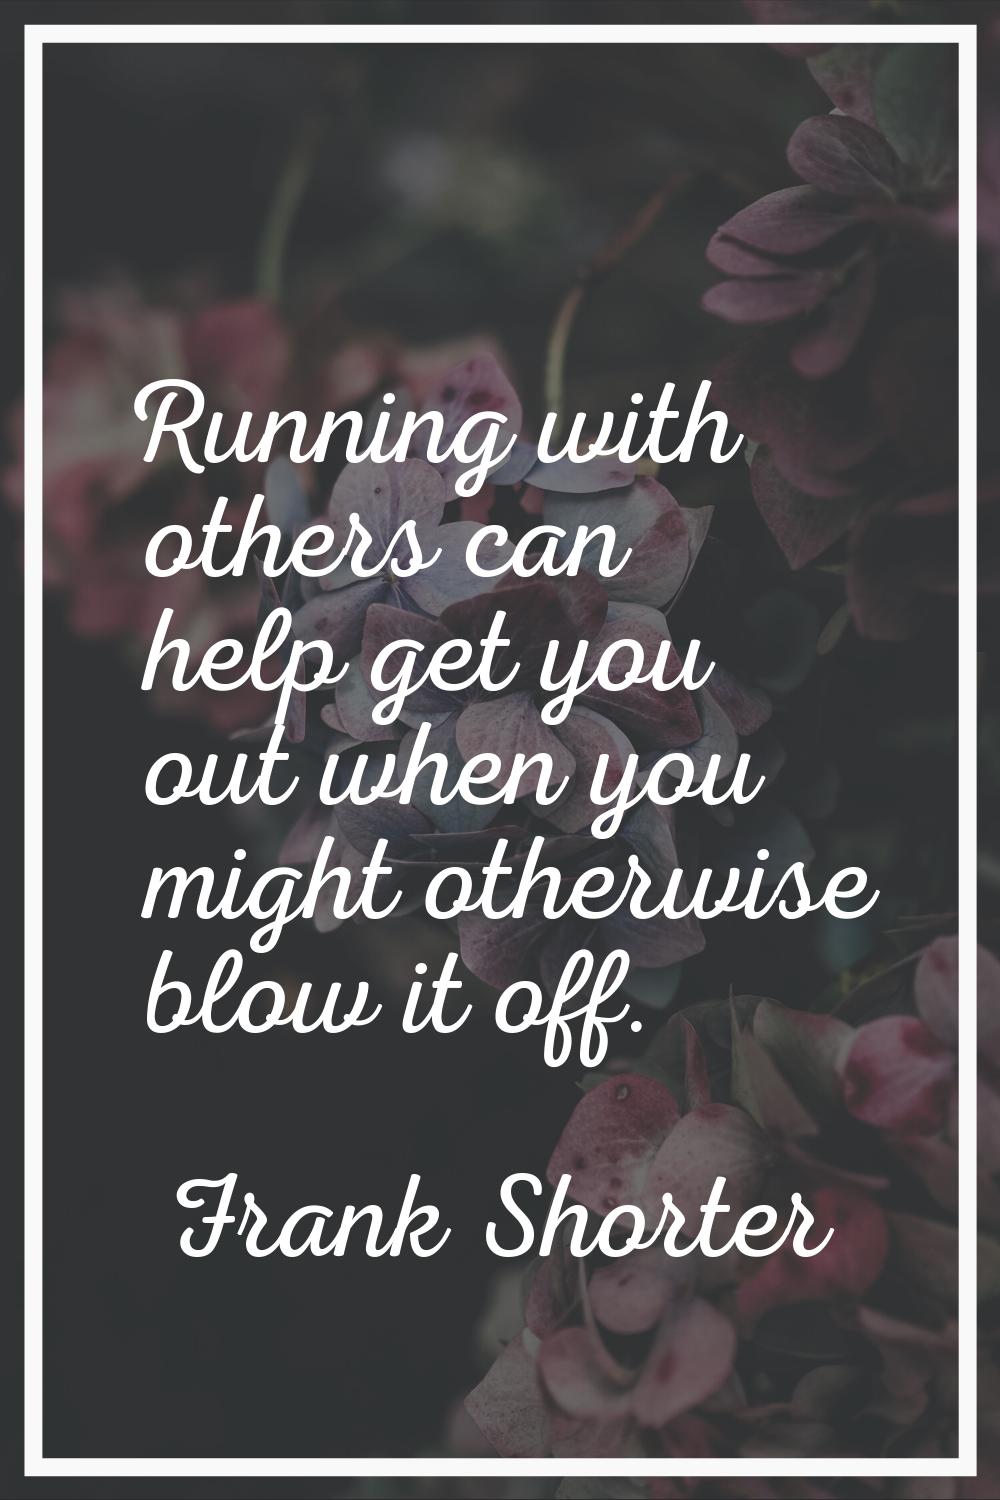 Running with others can help get you out when you might otherwise blow it off.